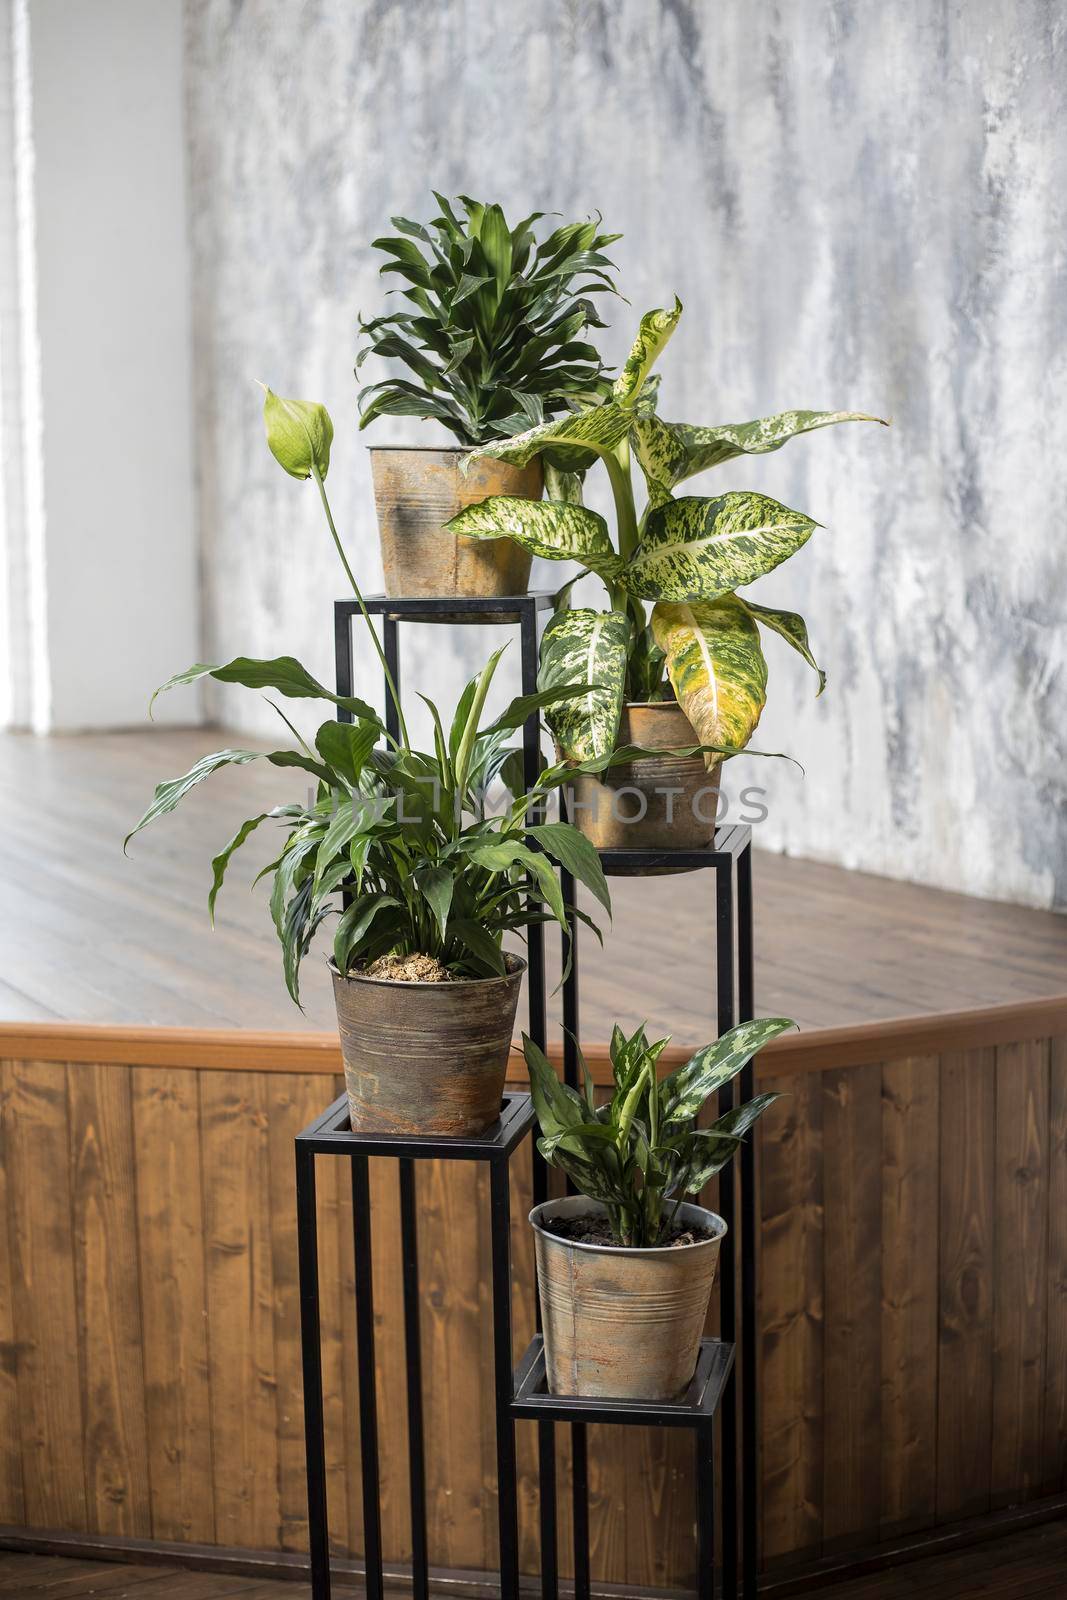 various types of dieffenbachia in terracotta pots in a special plant stand against the background of a wooden podium in an interior with gray walls matching Venetian plaster.